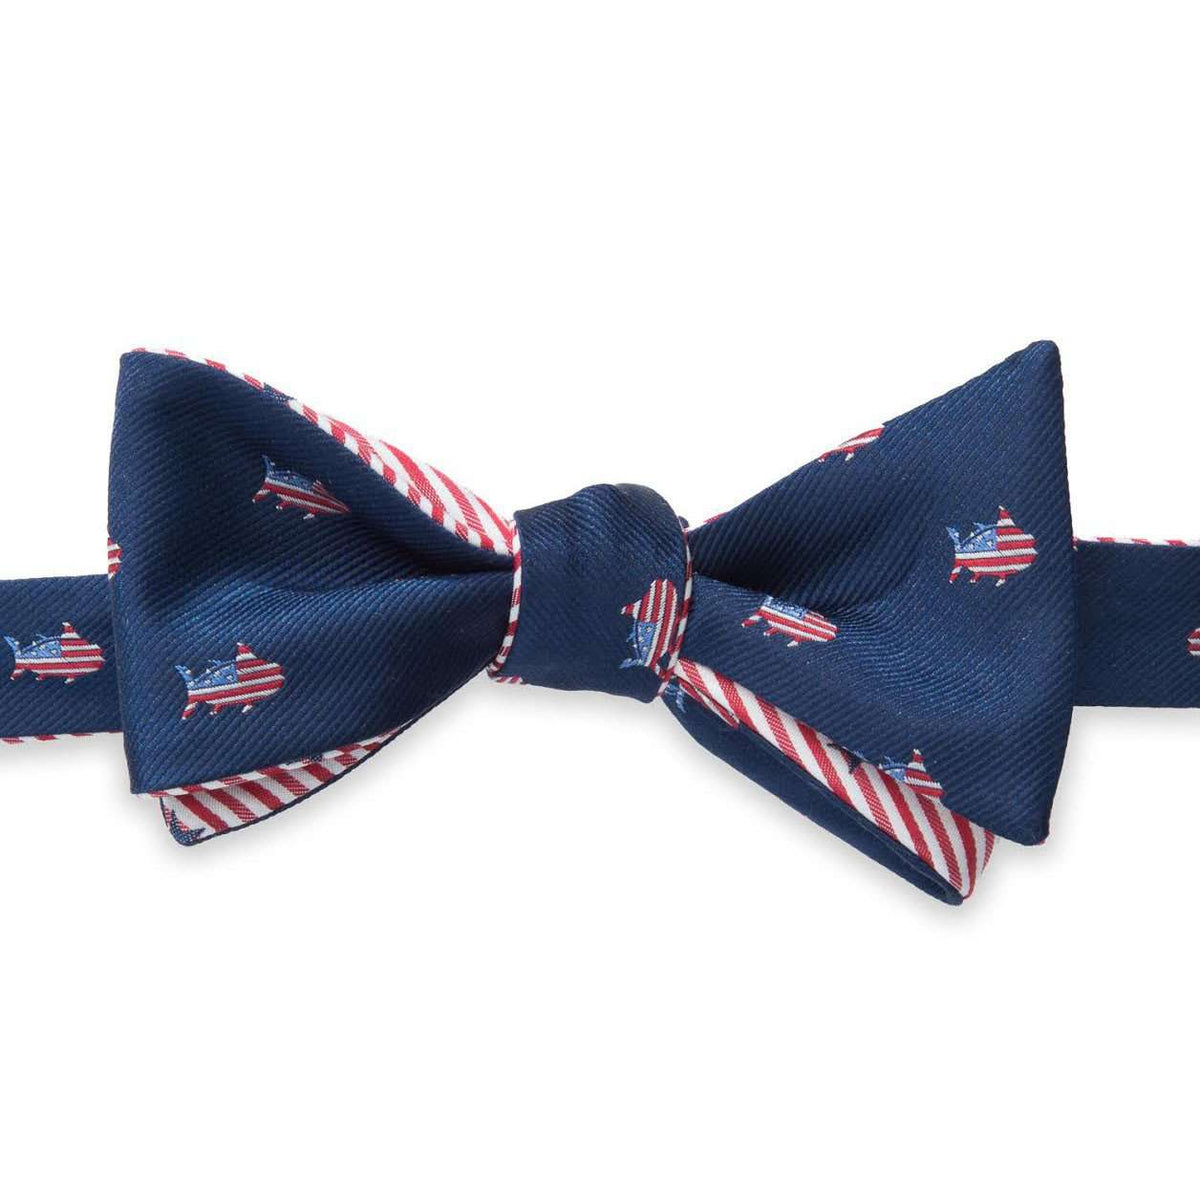 Reversible Oh Say Can You Sea Bow Tie in True Navy by Southern Tide - Country Club Prep